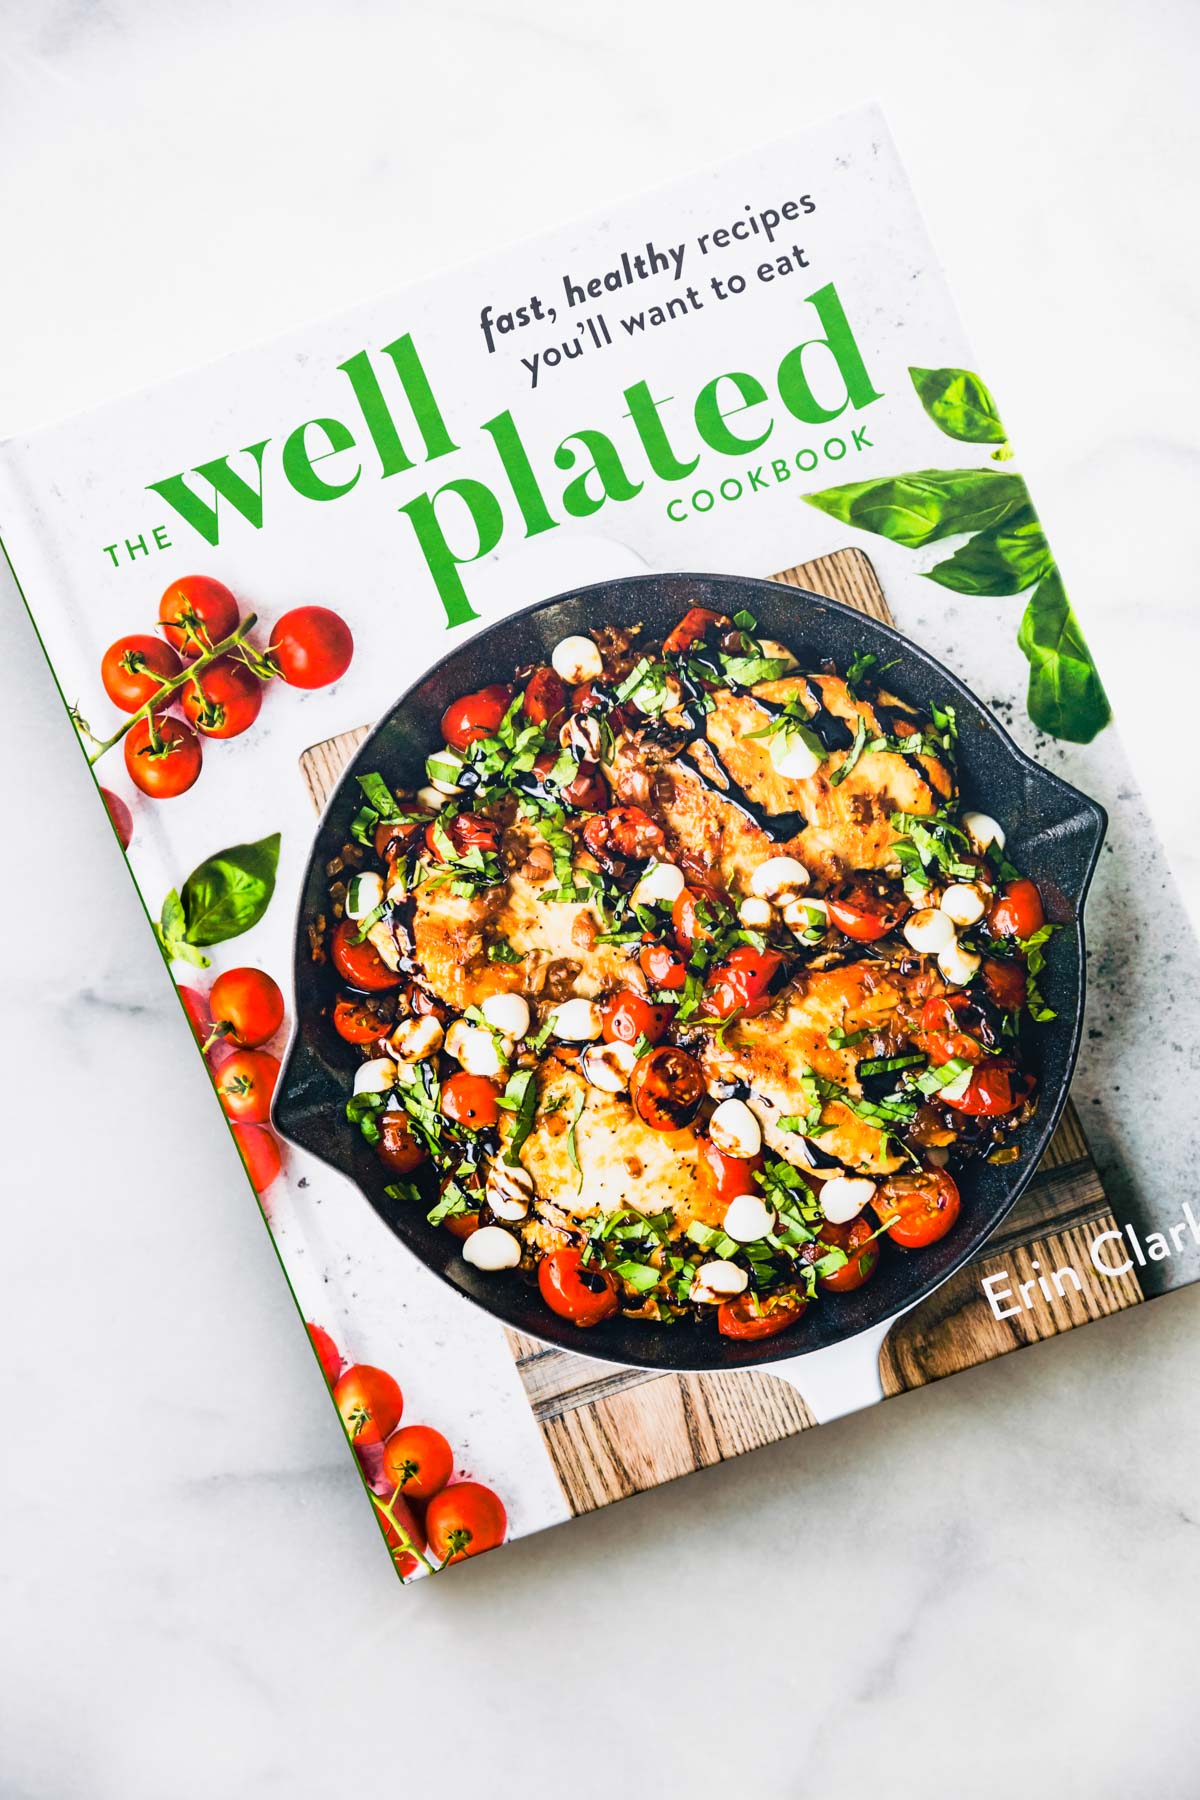 The Well Plated Cookbook cover